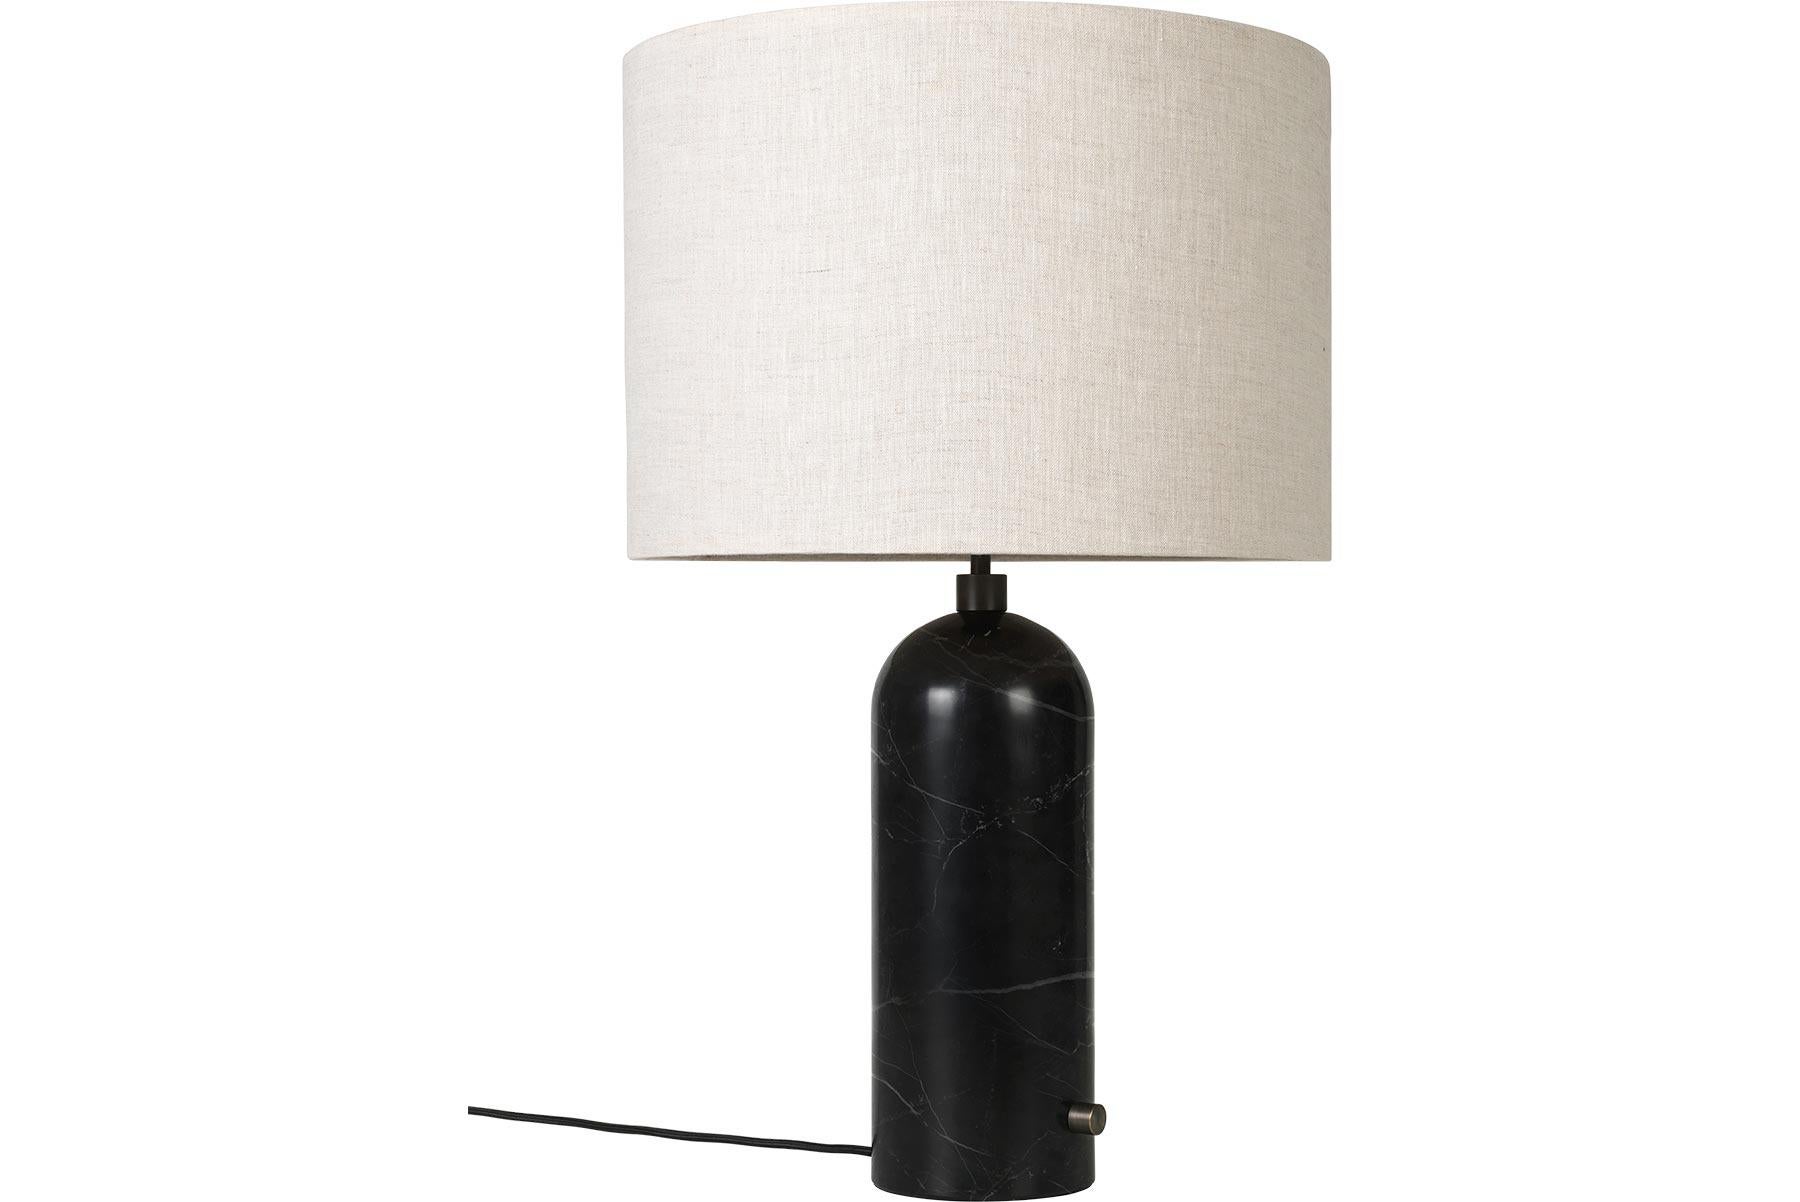 Gravity Table Lamp, Large, Black Marble, White In New Condition For Sale In Berkeley, CA